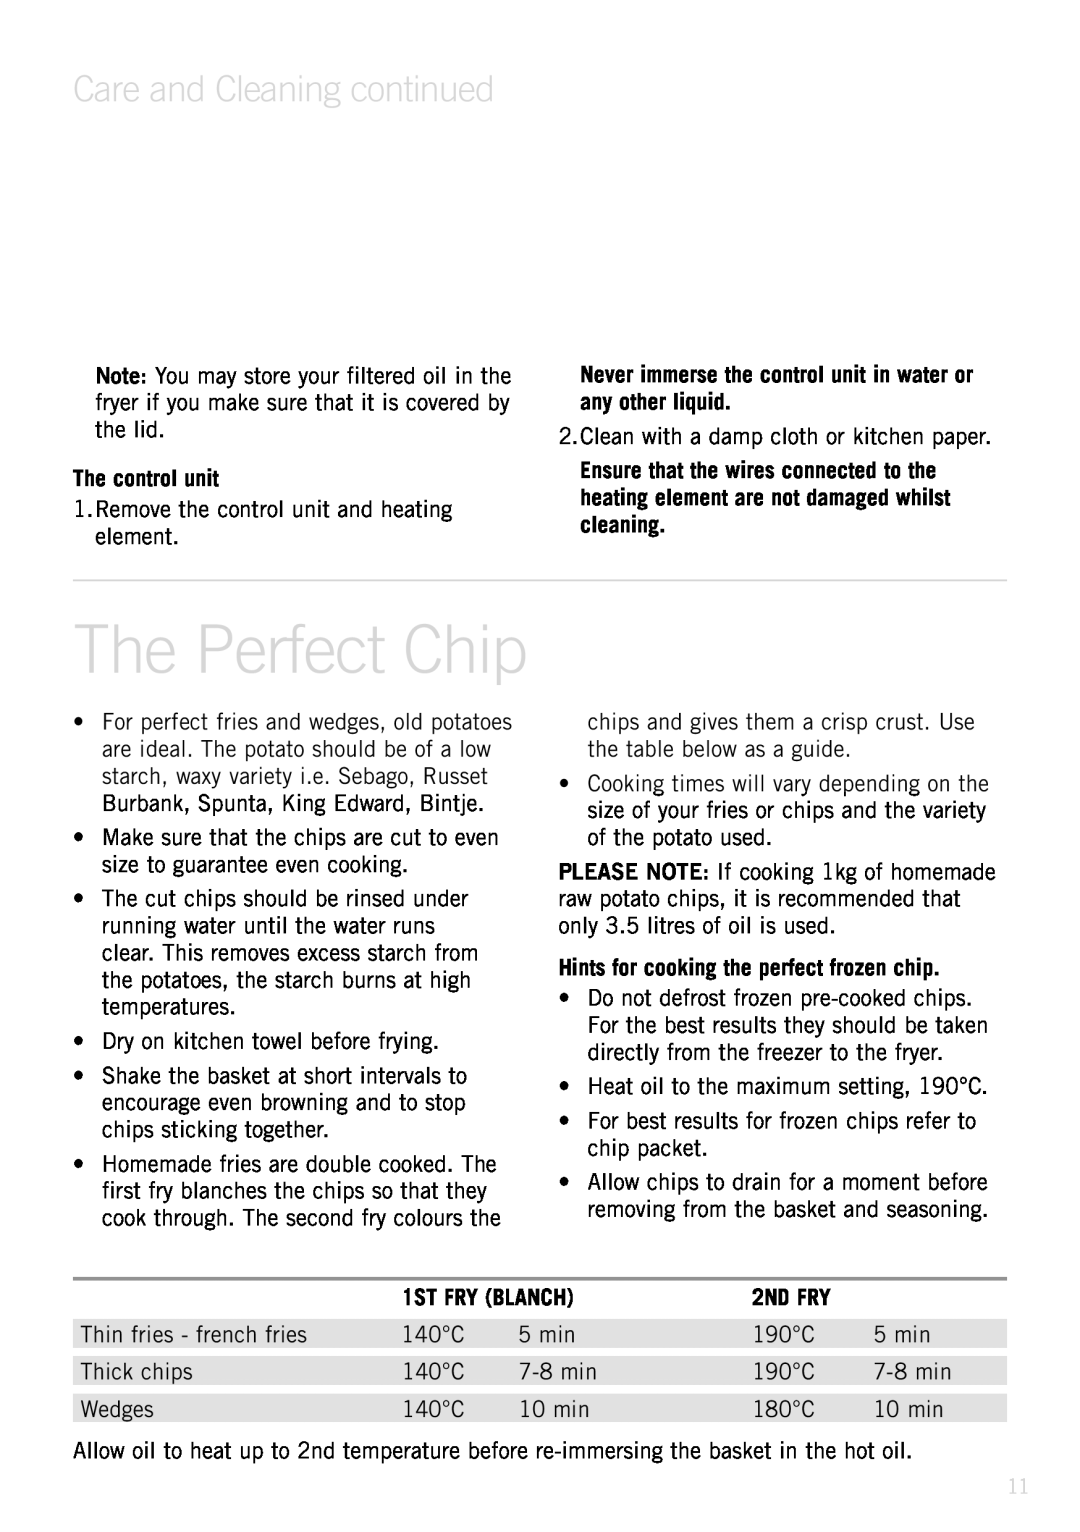 Sunbeam Deep Fryer manual Care and Cleaning continued, The control unit, Hints for cooking the perfect frozen chip, 2ND FRY 